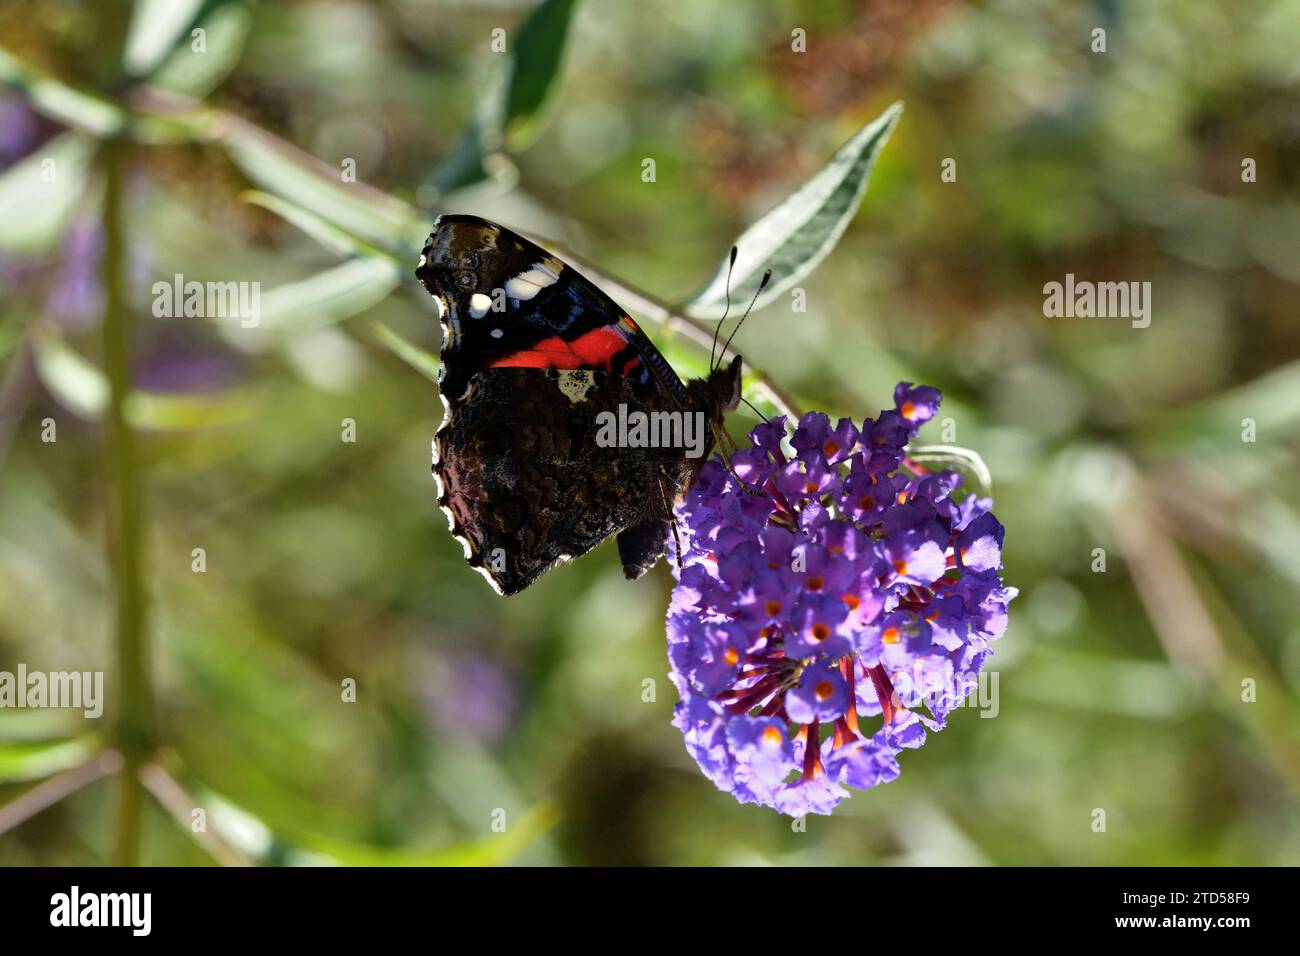 European peacock butterfly fly in a meadow full of colorful flowers Stock Photo